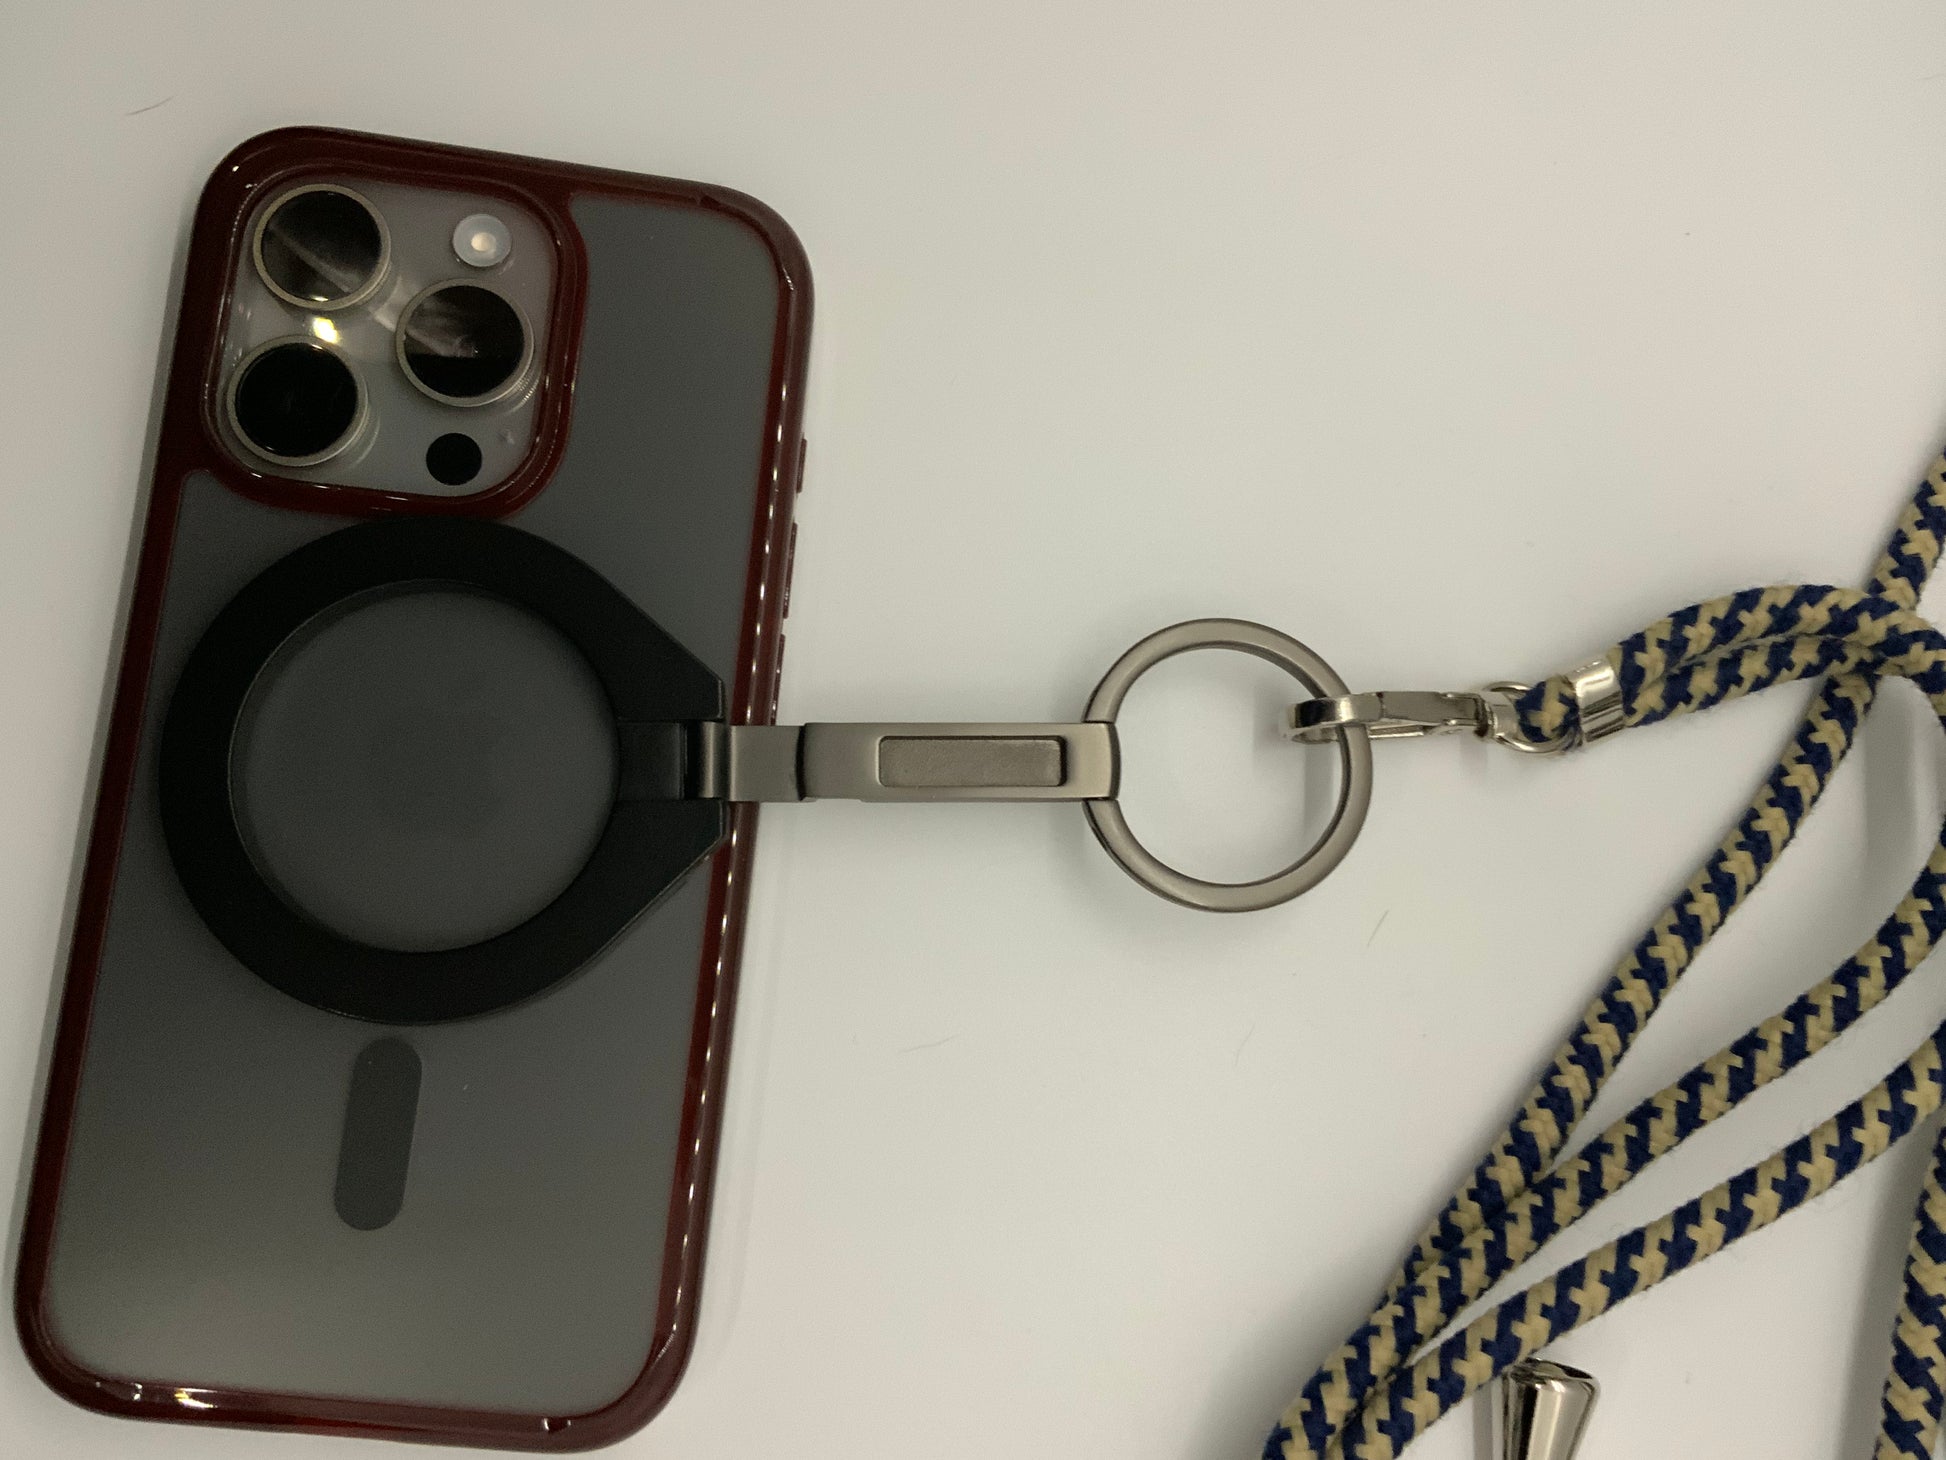 Be My AI: The picture shows a smartphone with a case on it. The case is dark red with a black circular attachment on the back, possibly for grip or as a stand. The phone's camera is visible at the top left corner of the case, with three lenses and a flash.

There is also a lanyard attached to the case. The lanyard has a metal clip and a keyring attached to it. The strap of the lanyard is made of fabric with a zigzag pattern in dark blue and beige colors.

The background is plain white.